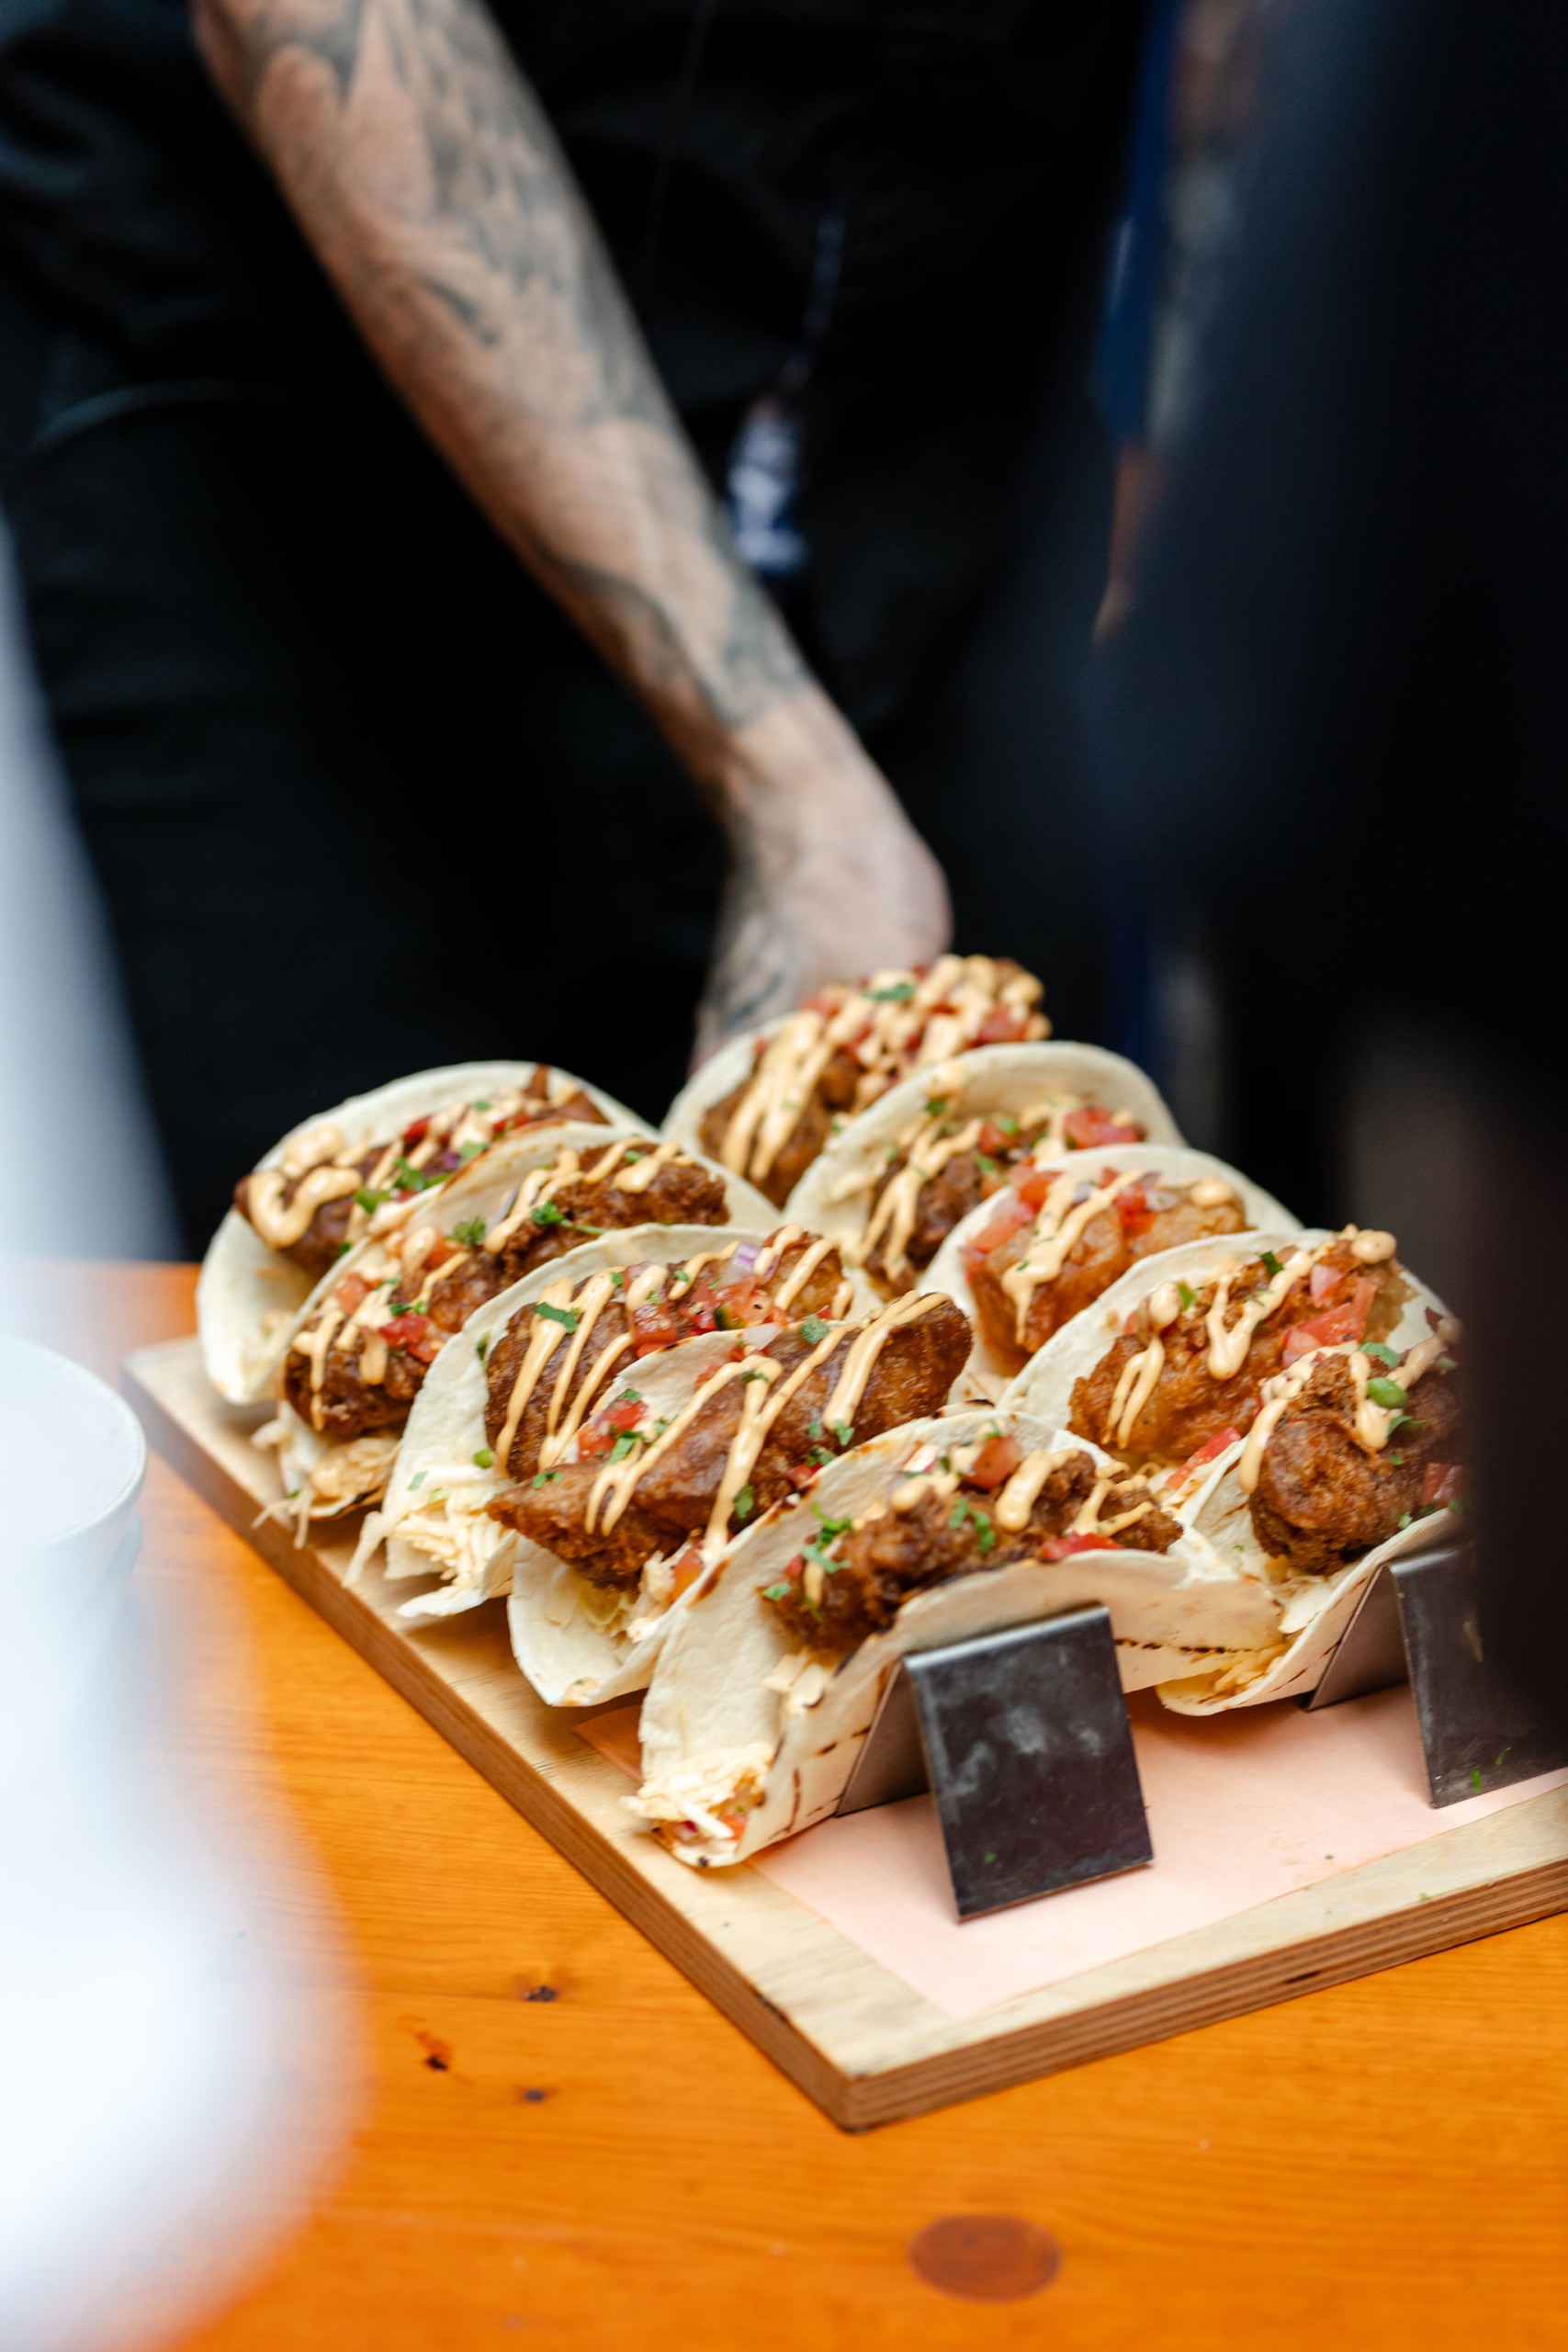 A tray of tacos on a table at a social event.